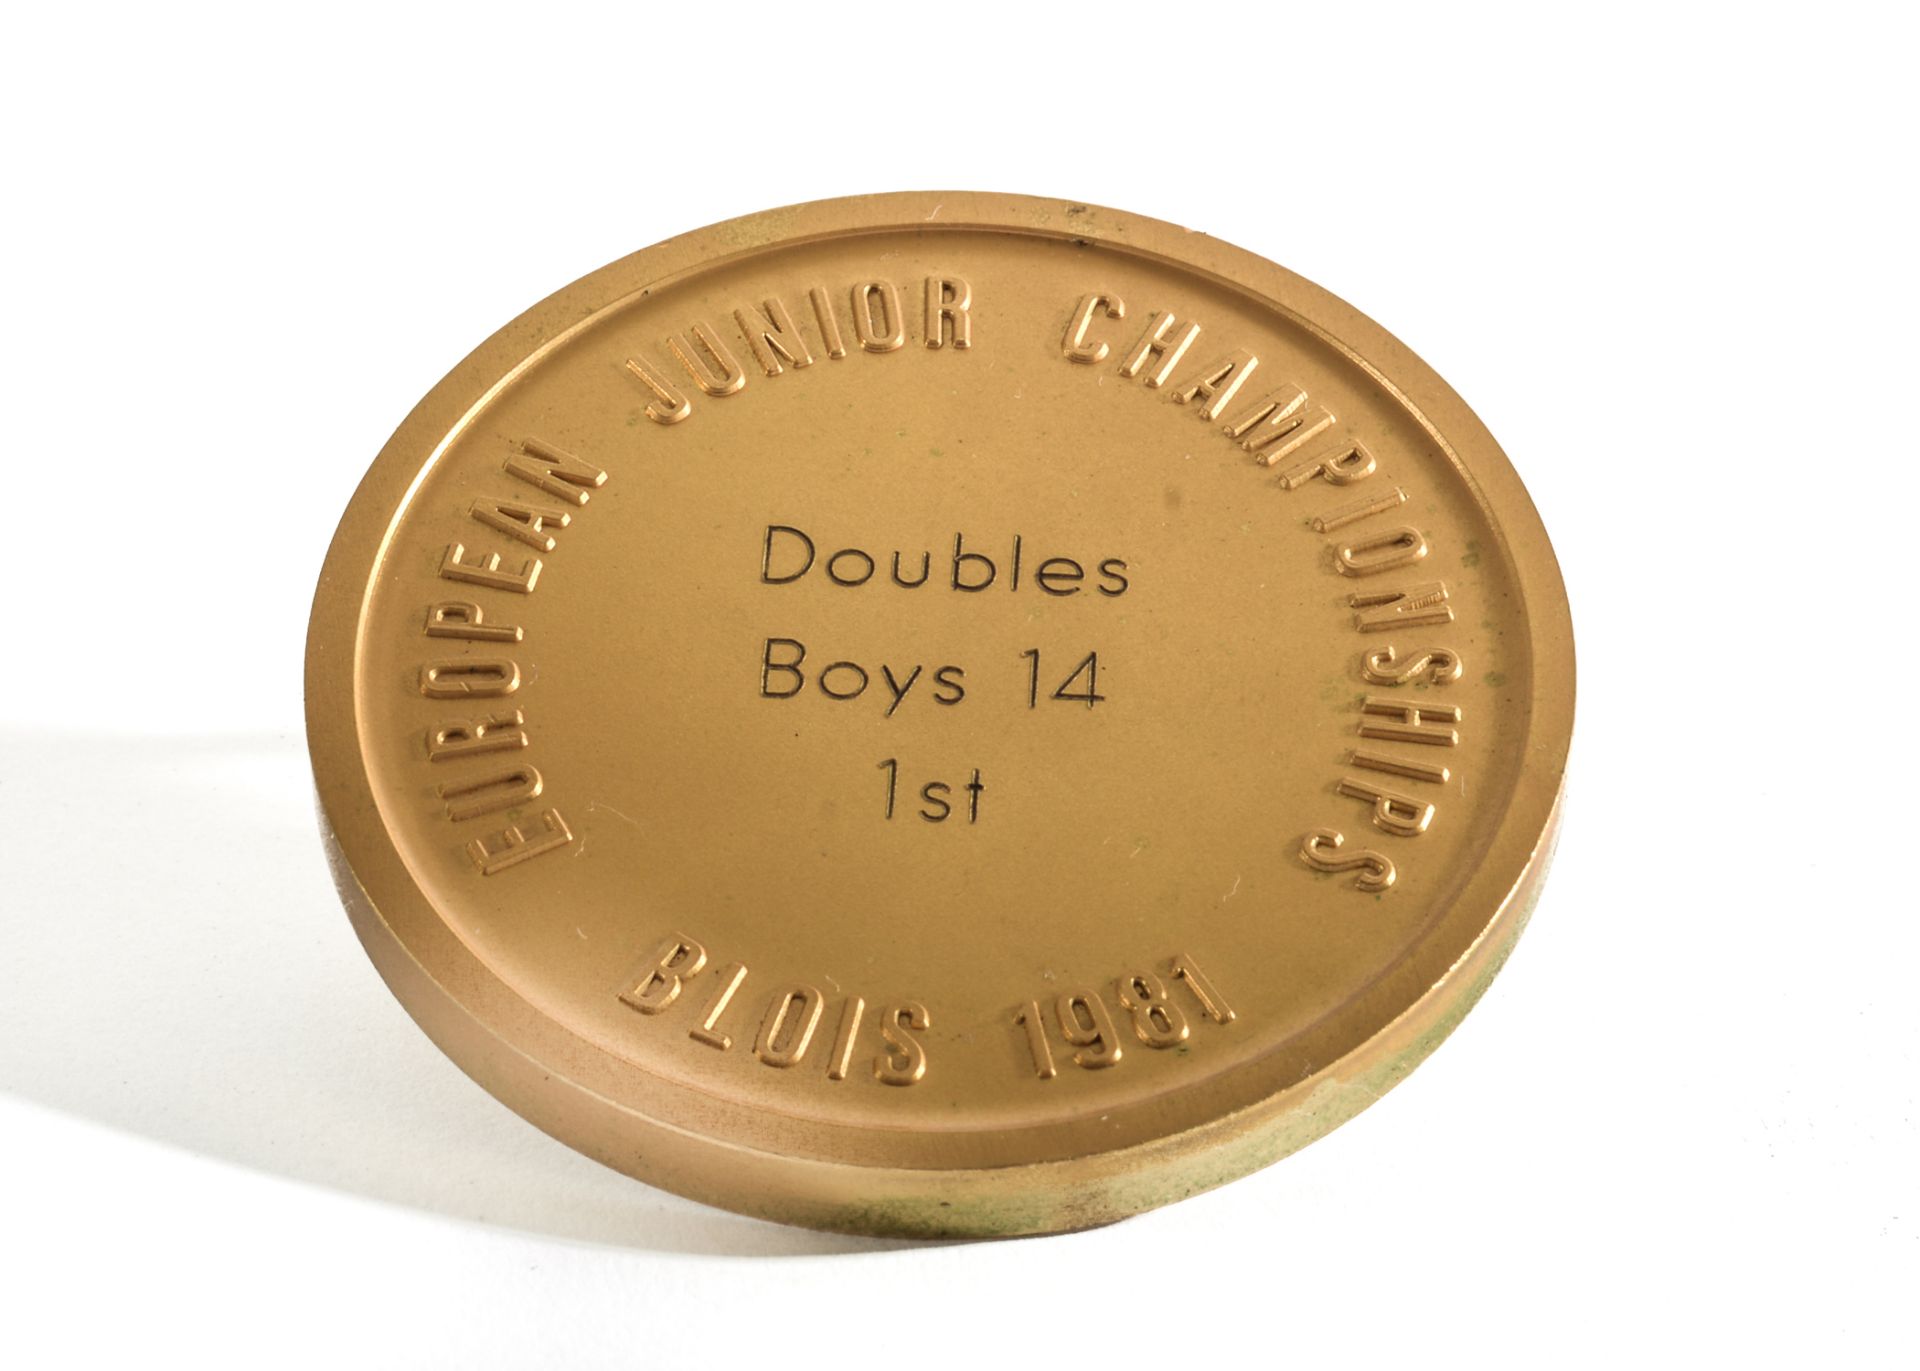 A Cast Bronze Coloured Medal, approx. 60mm in diameter bearing the words EUROPEAN JUNIOR - Image 2 of 3